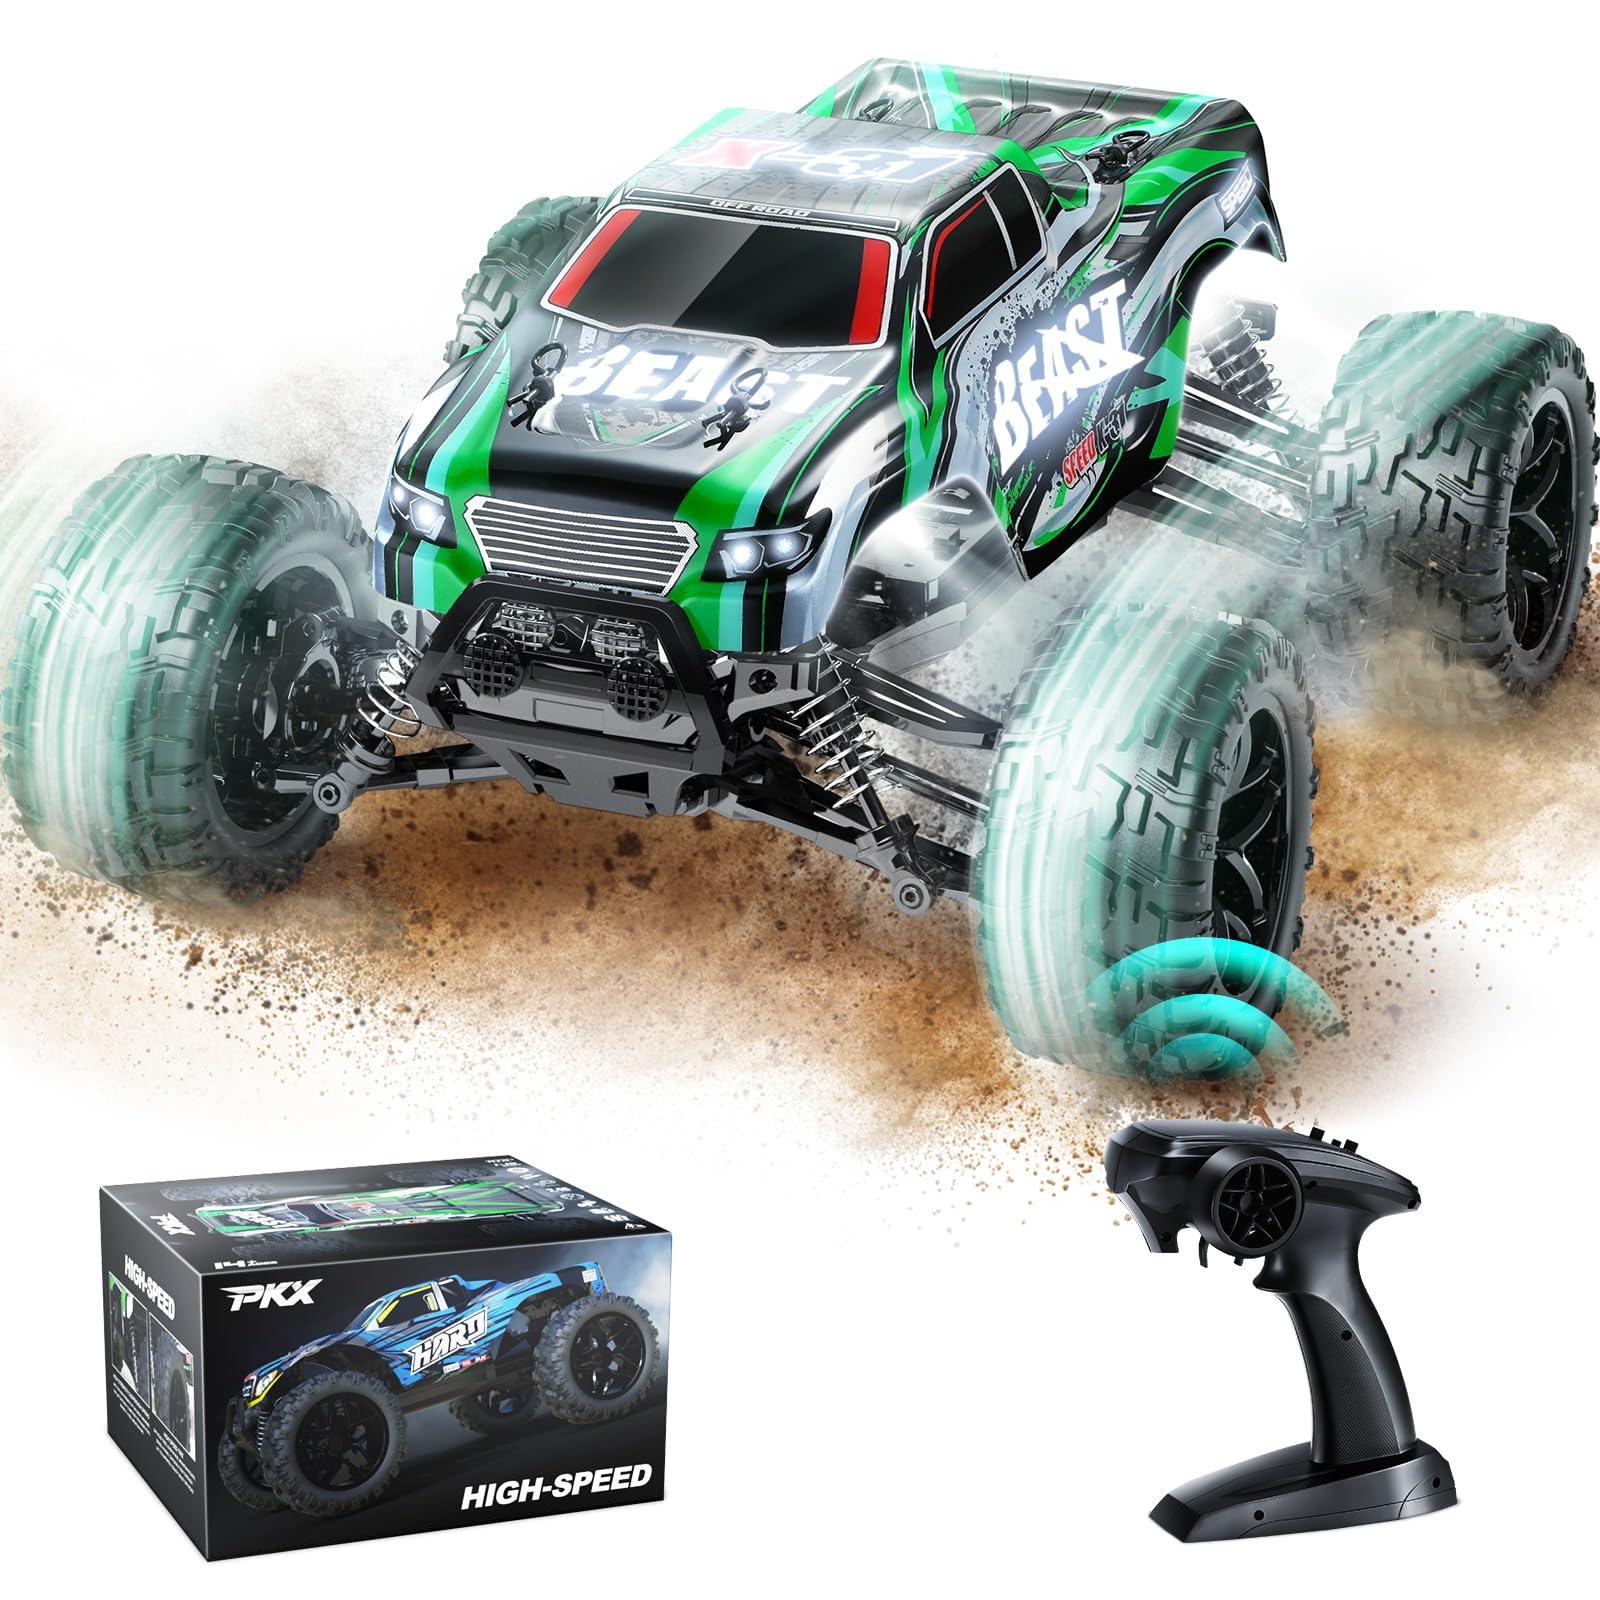 Fastest Remote Car: Safety First: Unique Features on the Fastest Remote Control Car